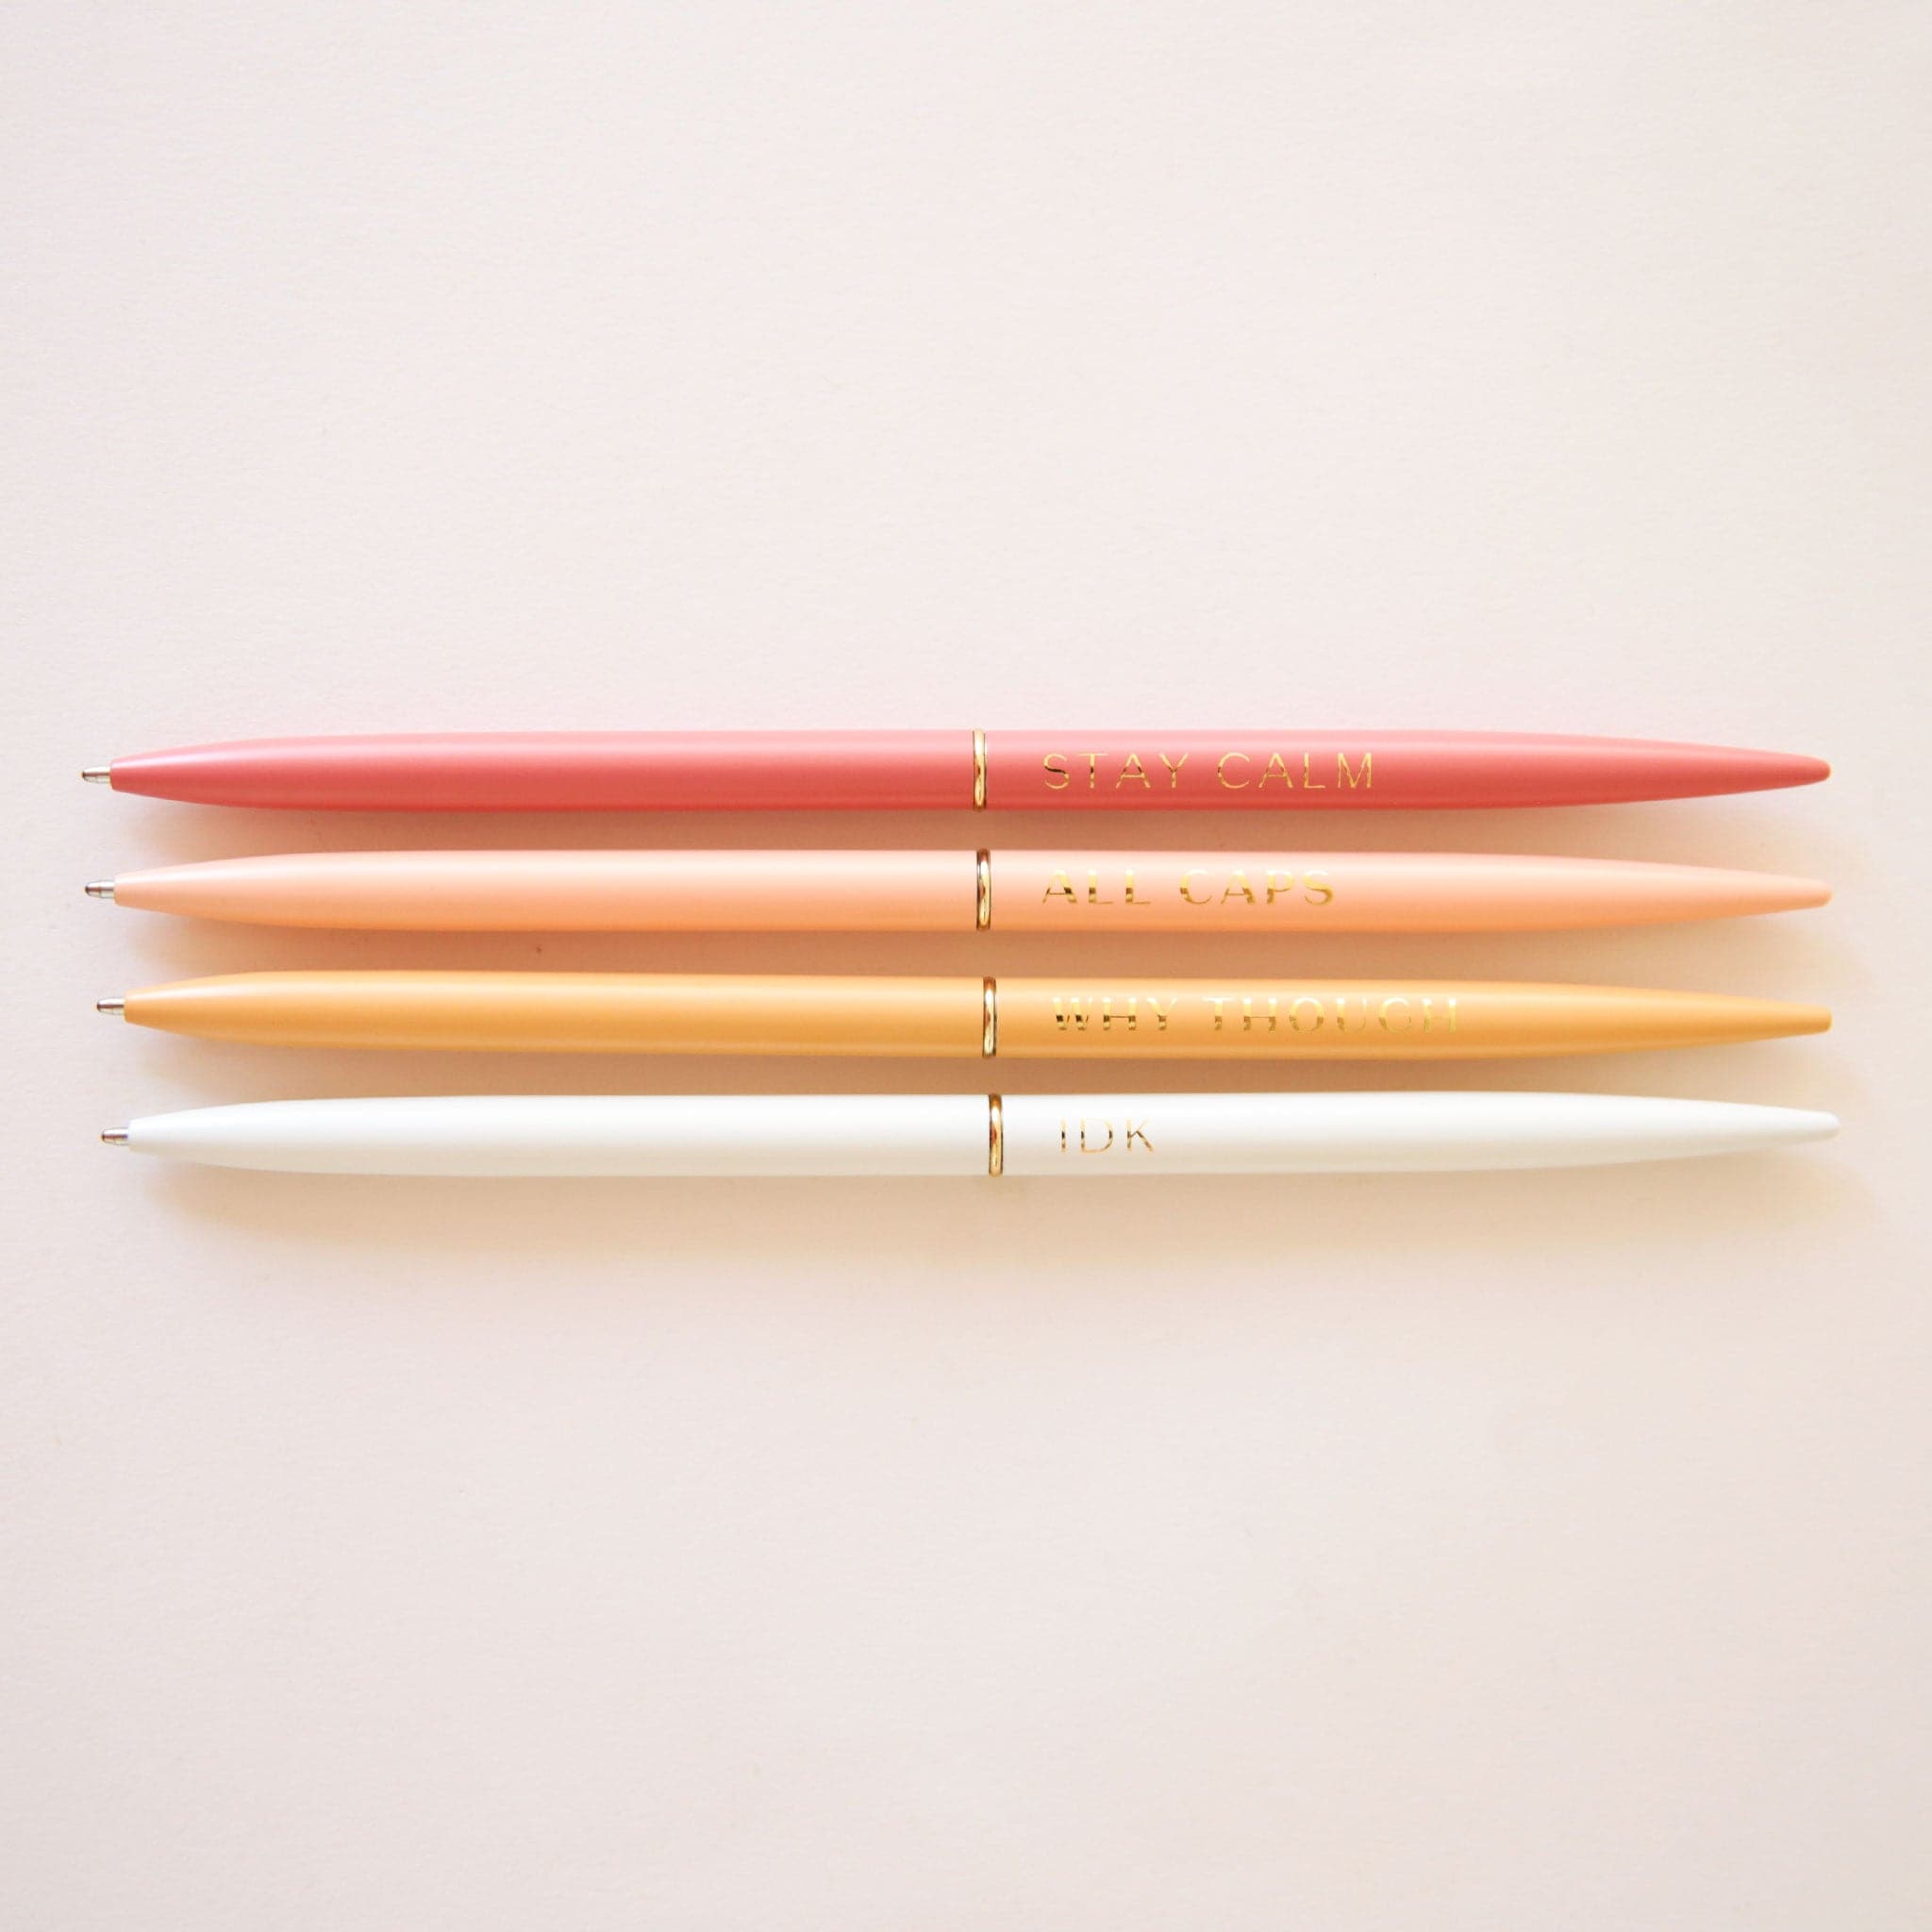 A set of 4 slender pens in yellow, white, salmon and rust. Each pen says something different. The rust pen says, &quot;Stay Calm&quot;. The salmon pen says, &quot;All Caps&quot;. The white pens says, &quot;Idk&quot;. And the yellow pen says, &quot;Why Though&quot;.